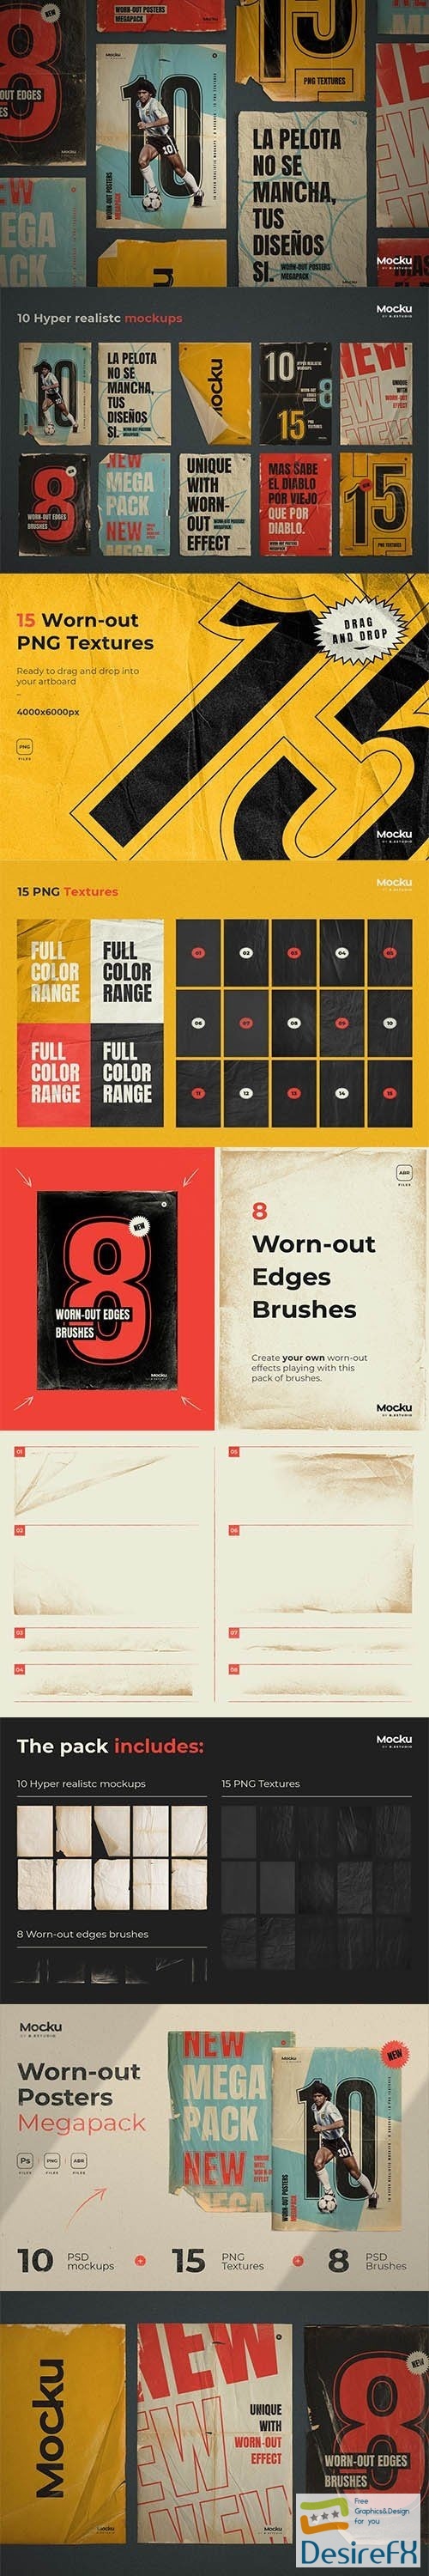 CreativeMarket - Worn out Posters Megapack 5868137